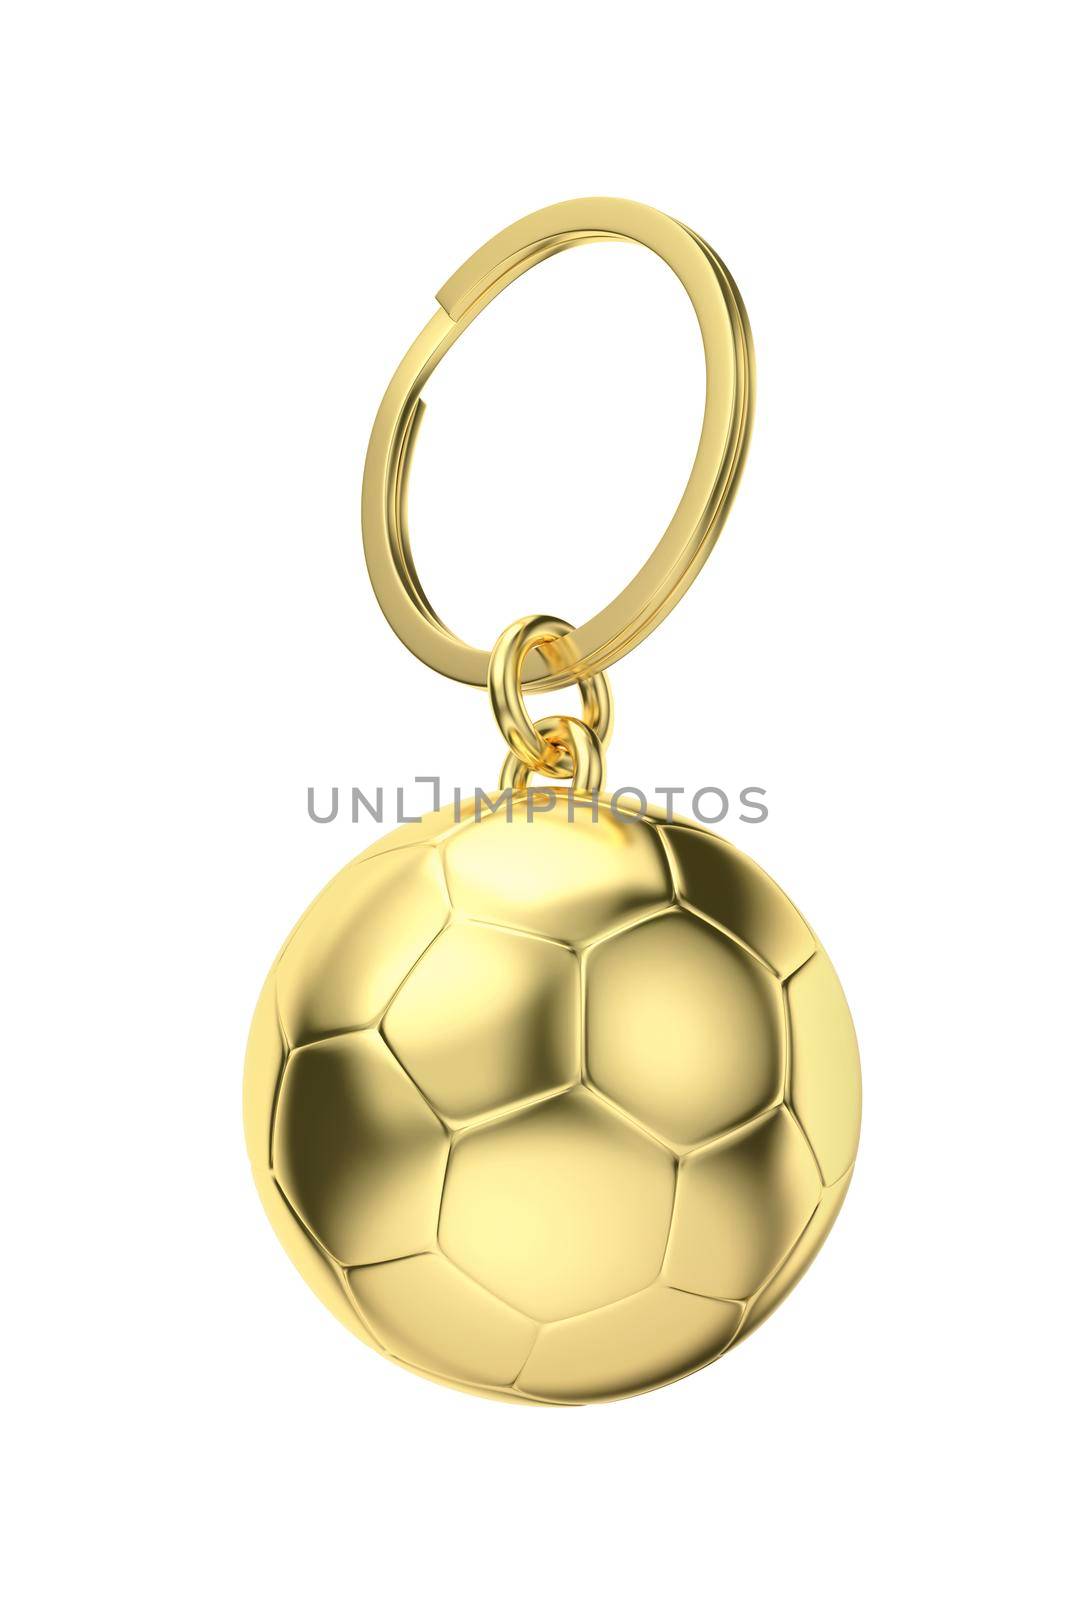 Gold keychain with soccer ball by magraphics